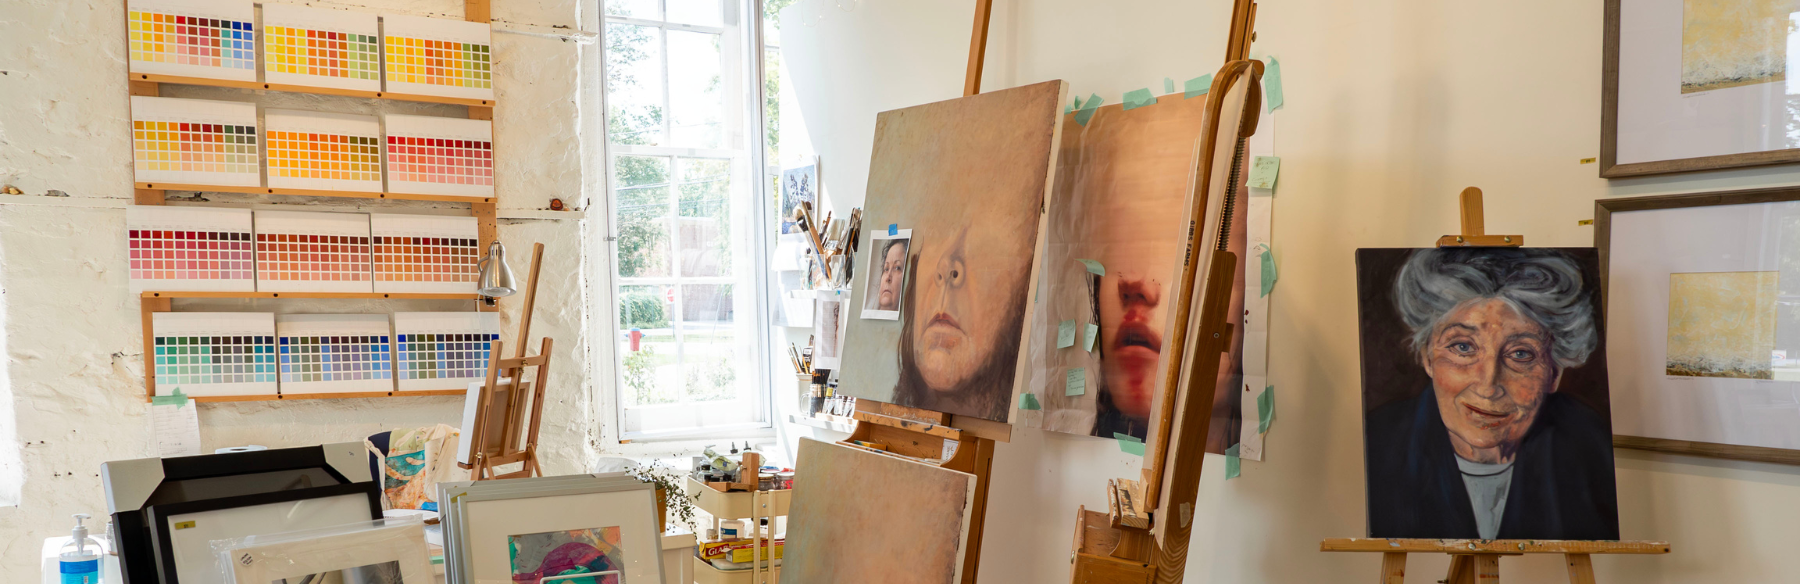 Image of an artists studio with canvas on easels to the left side of the image. The canvas are half painted images of faces. On the back wall there are a bunch of colour scale images on a shelf 